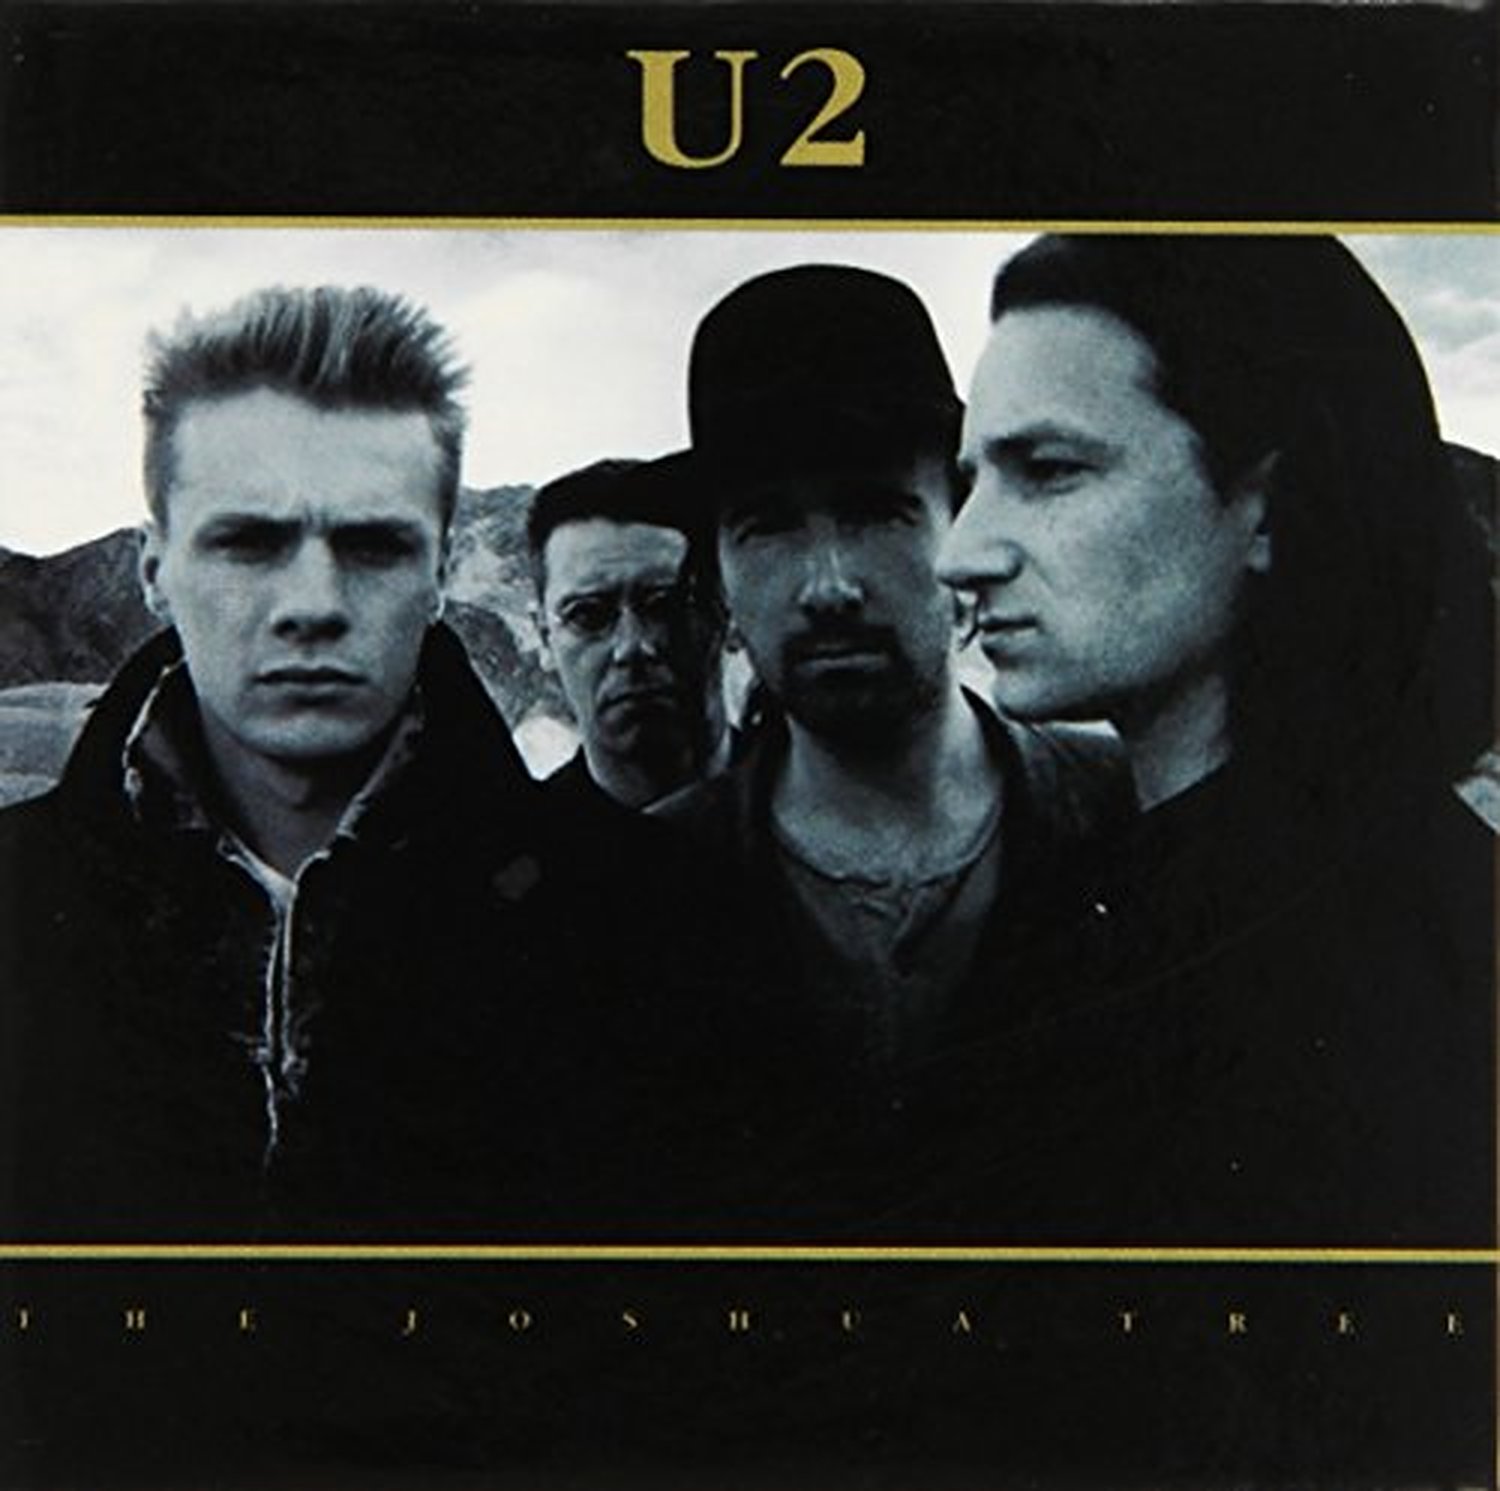 U2 to perform The Joshua Tree album in full for its 30th anniversary on upcoming tour.